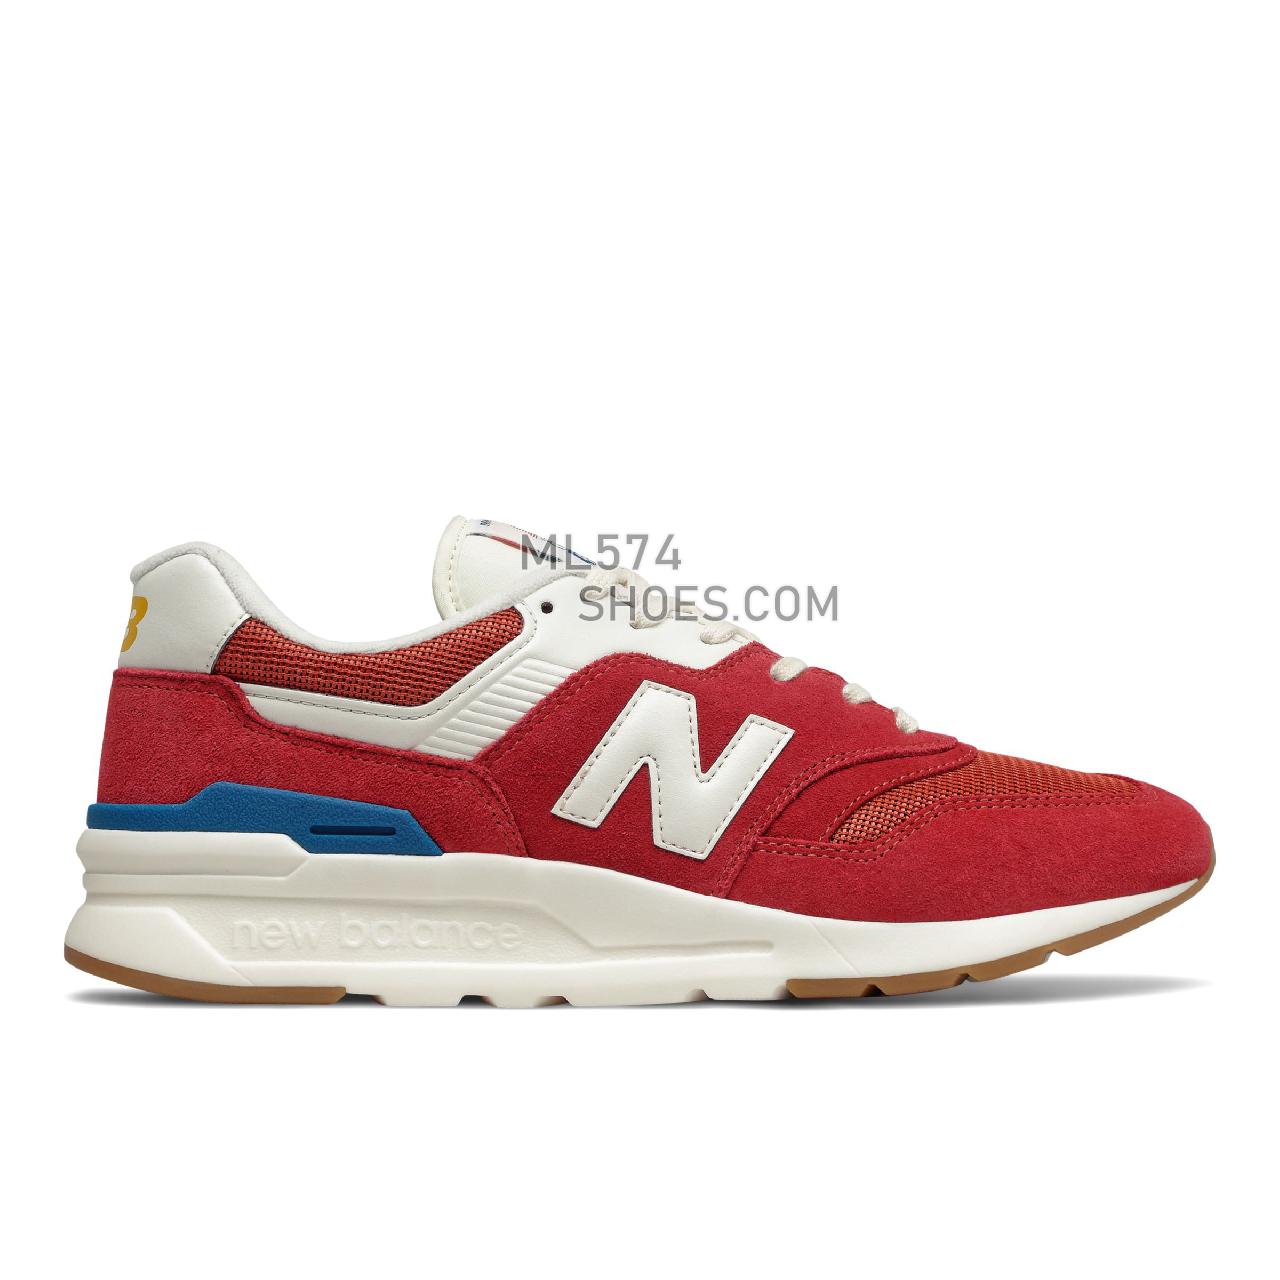 New Balance 997H - Men's Classic Sneakers - Team Red with Varsity Gold - CM997HRG